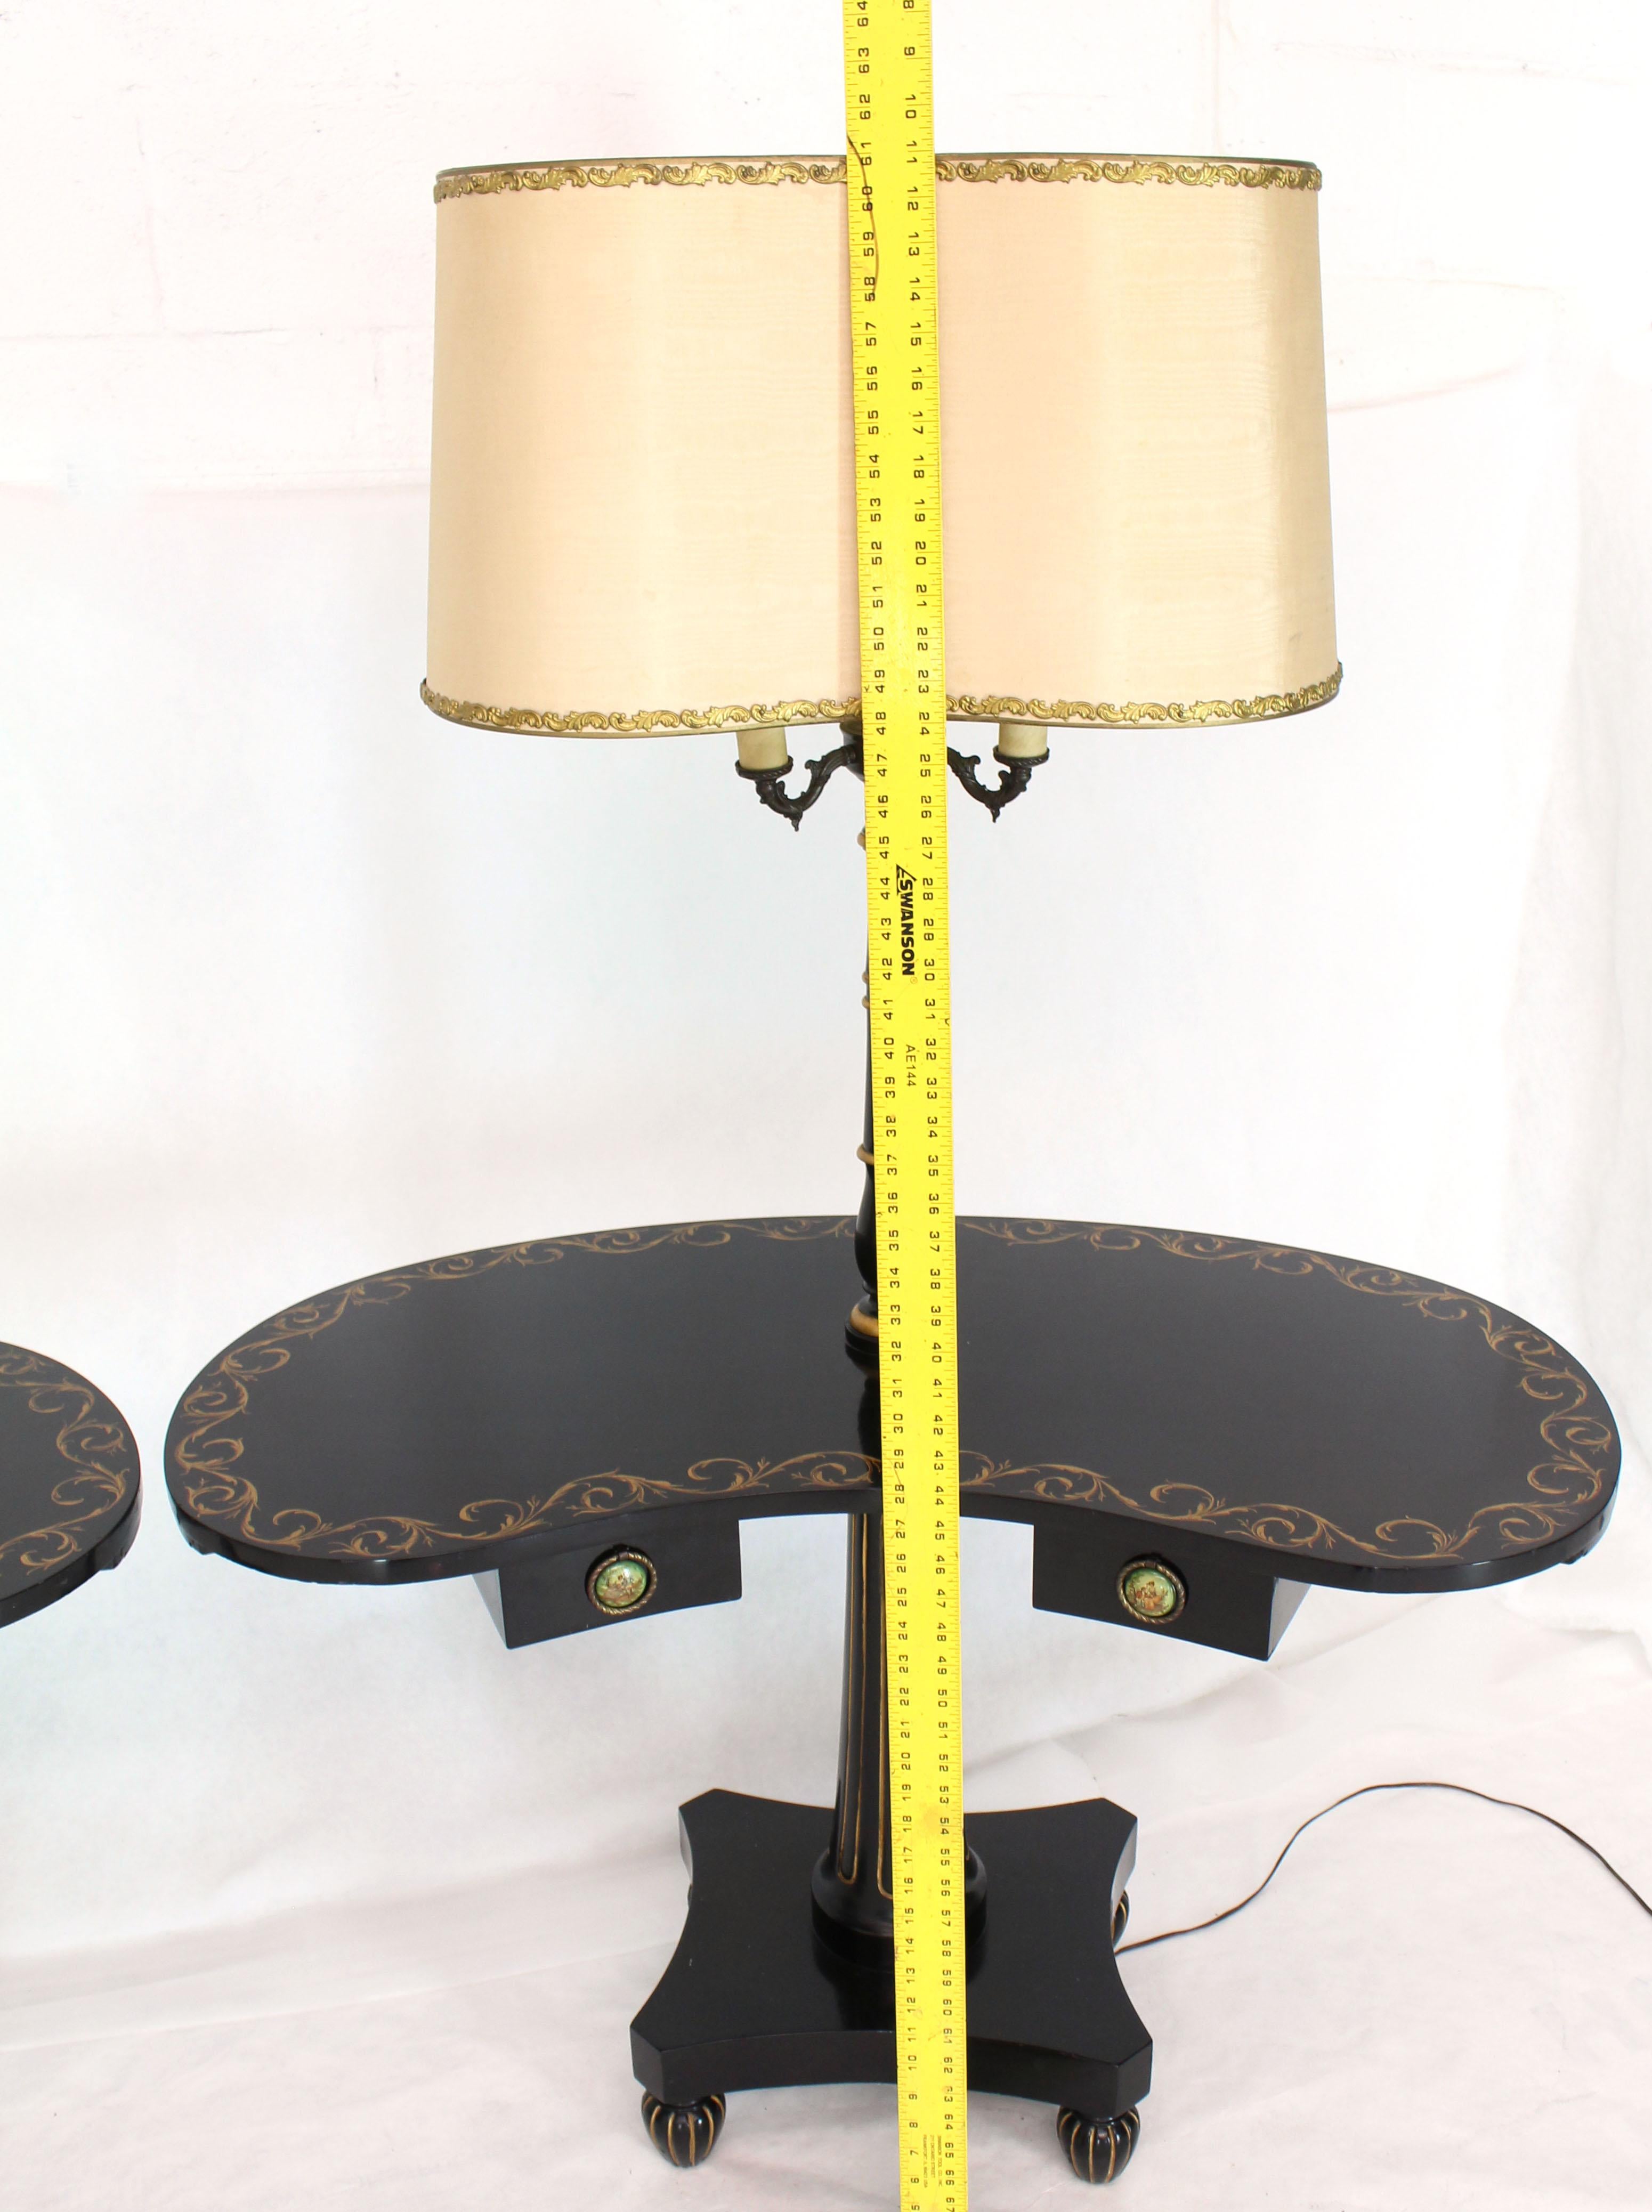 Pair of Black Lacquer Gold Decorated Kidney Shape Deco Floor Lamps Side Tables For Sale 6